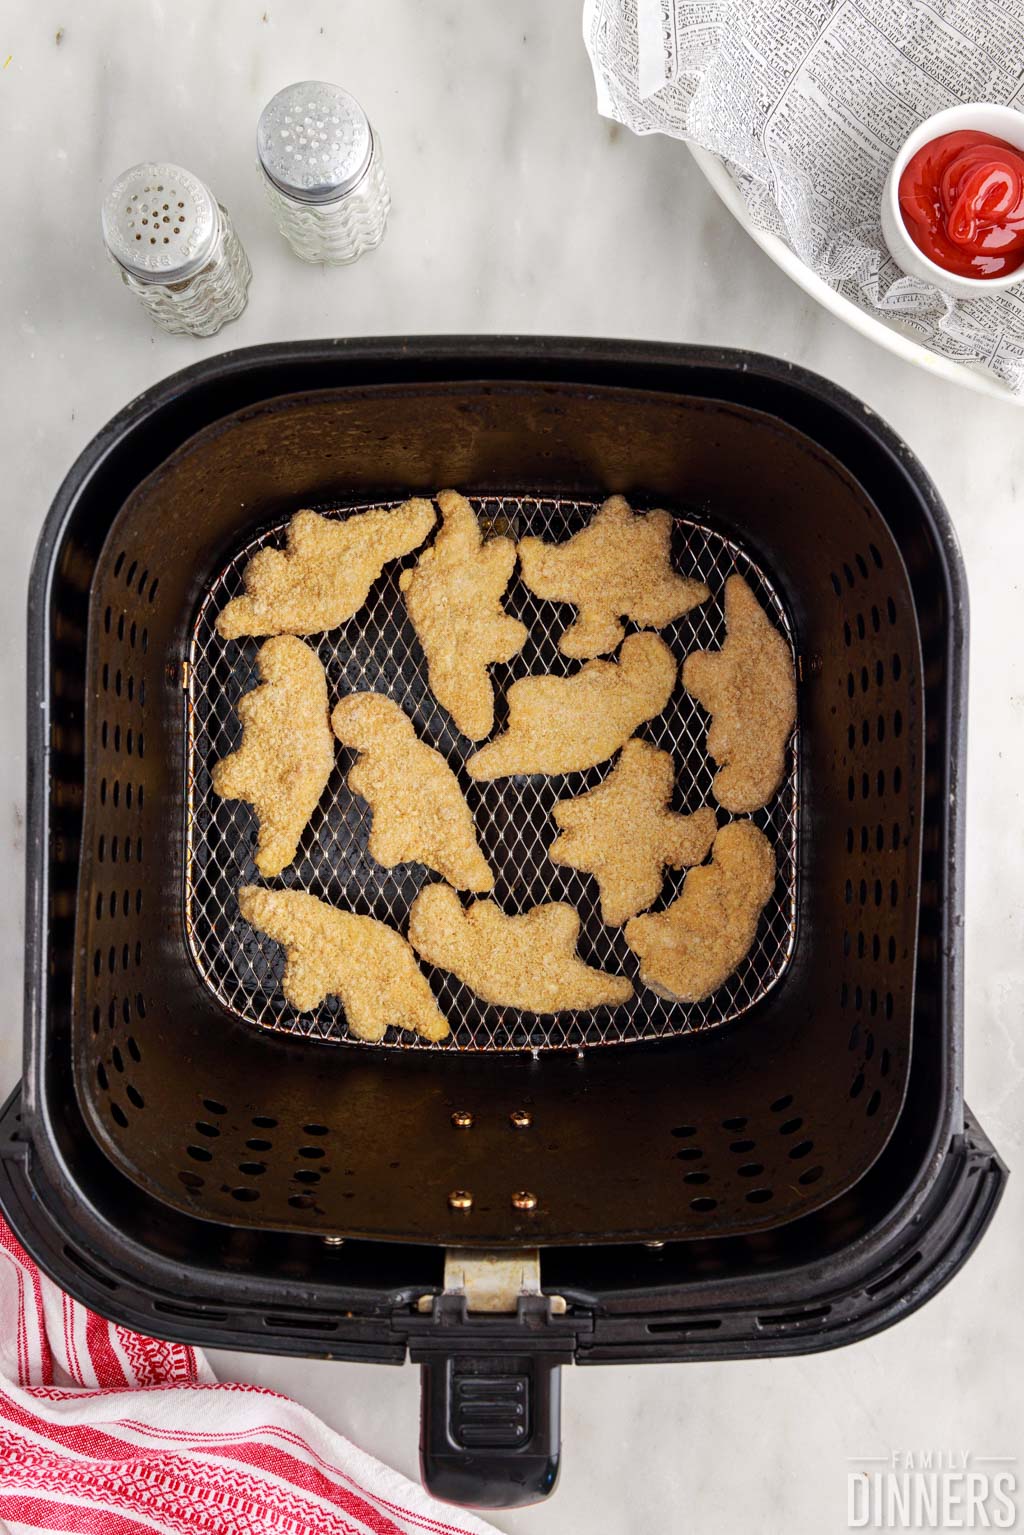 uncooked chicken nuggets in the air fryer